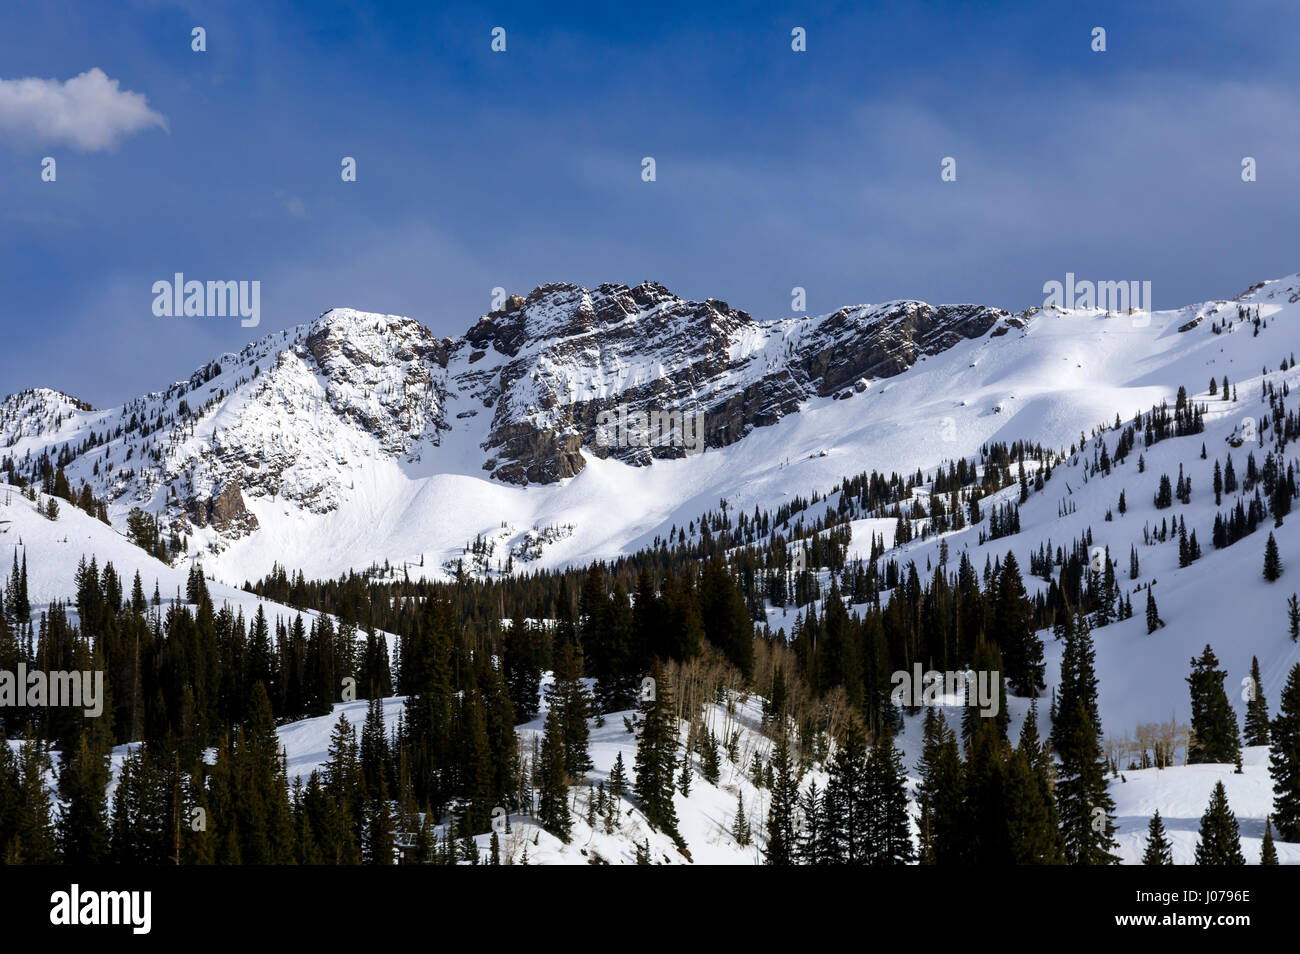 This is a view of a snow-covered mountain known as Devil's Castle located in the Albion Basin area of Alta, Utah, USA. Stock Photo